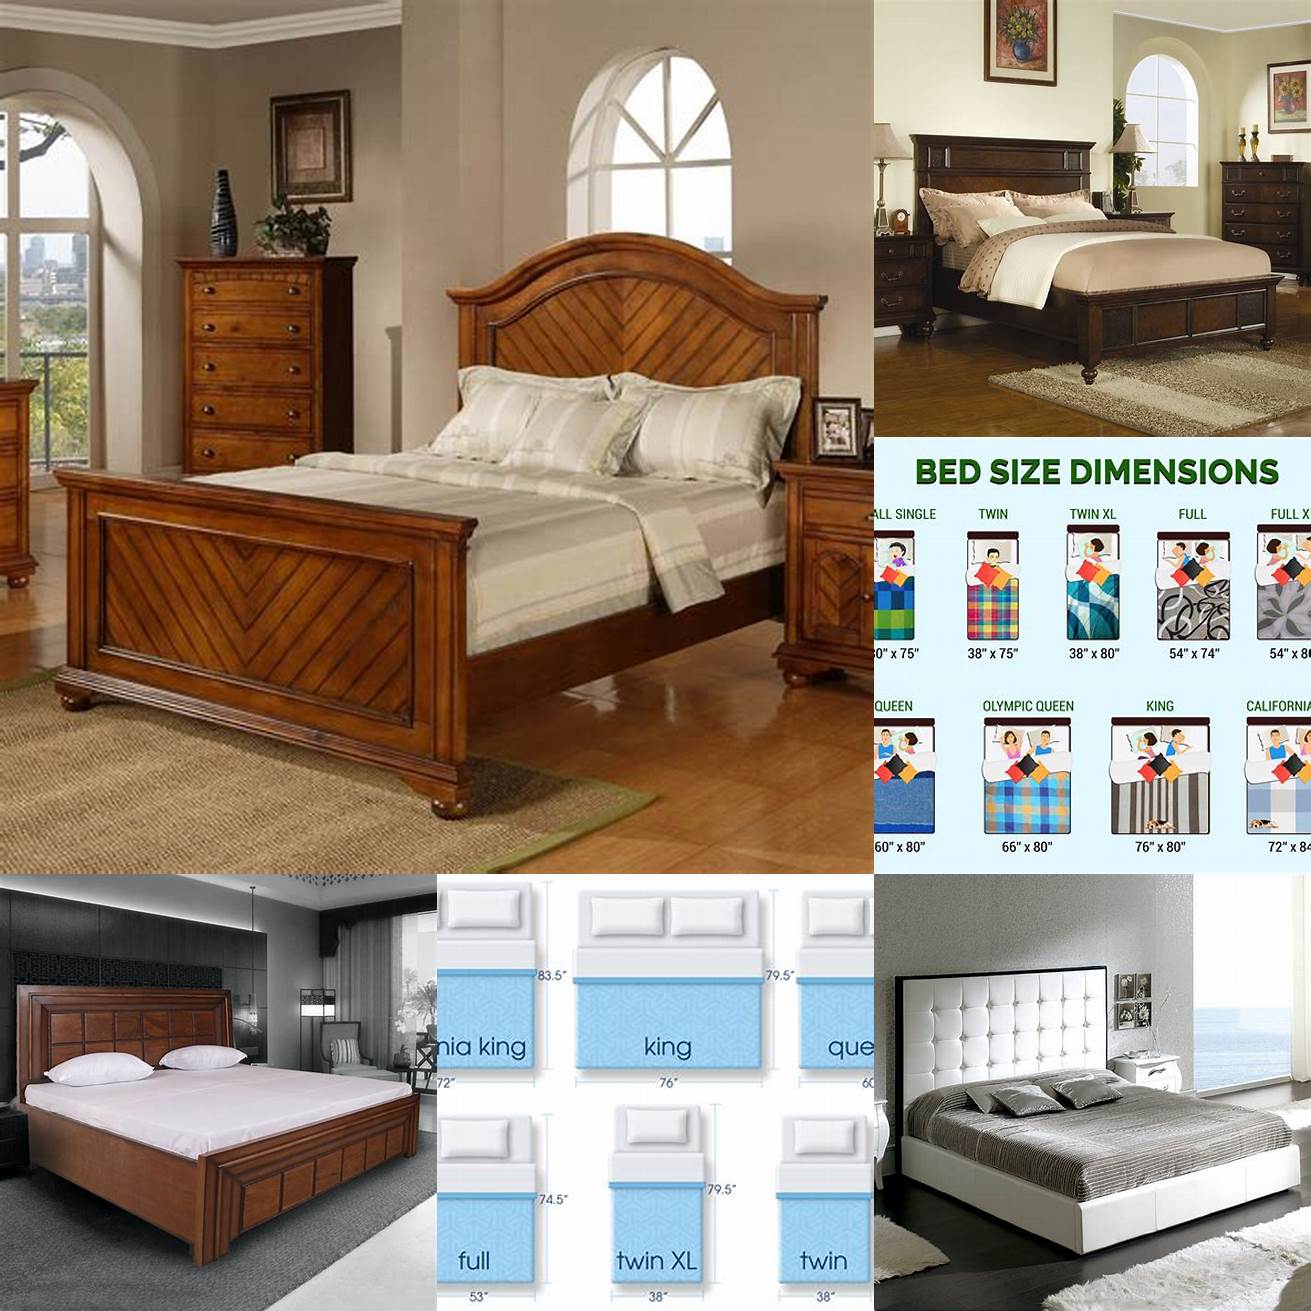 Image of different types of king size beds